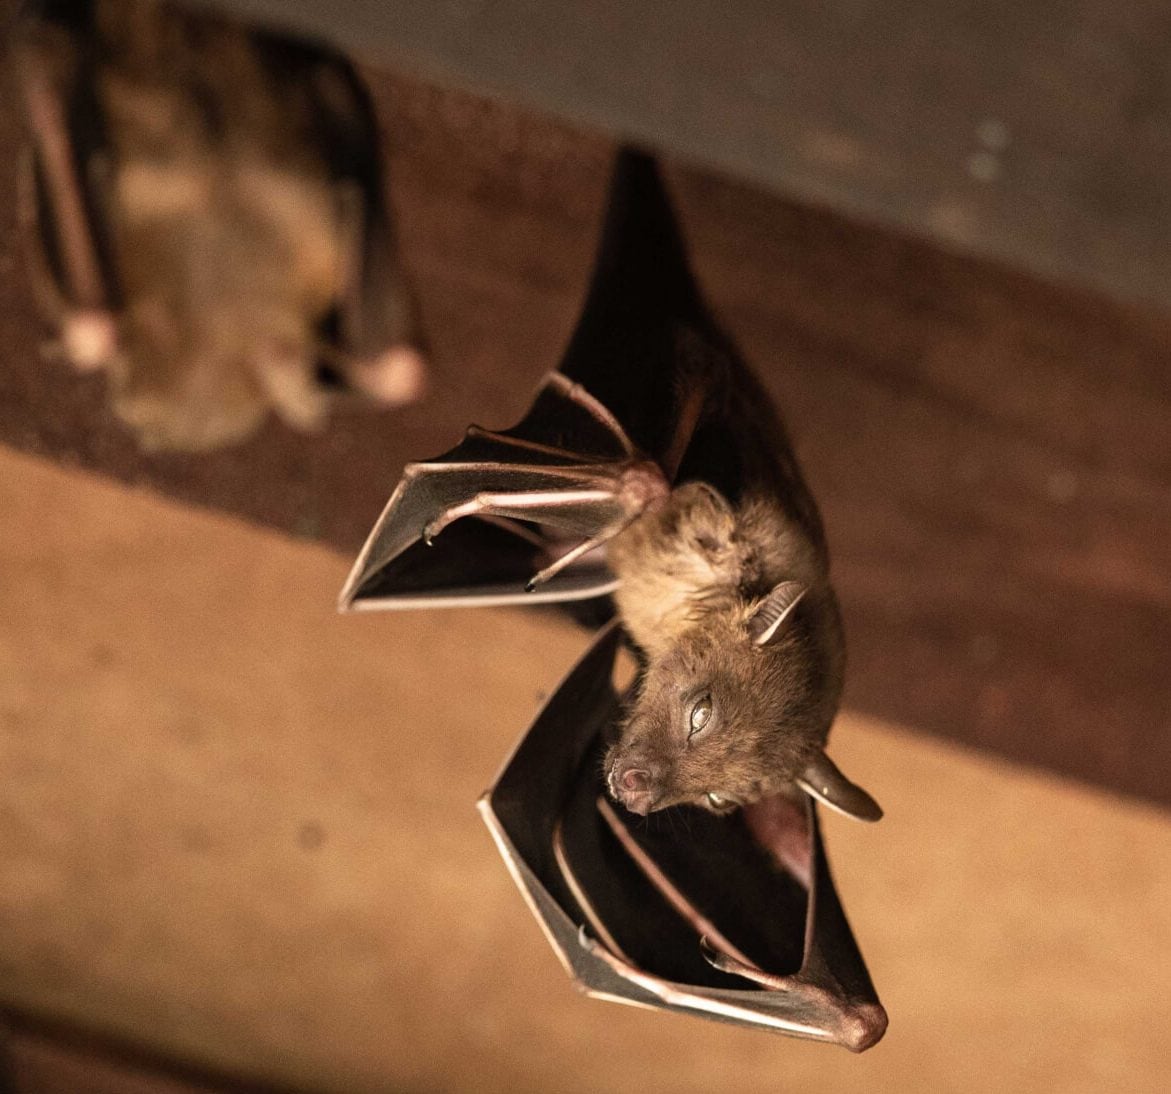 Expert bat removal services for a safe and humane solution in Townsend